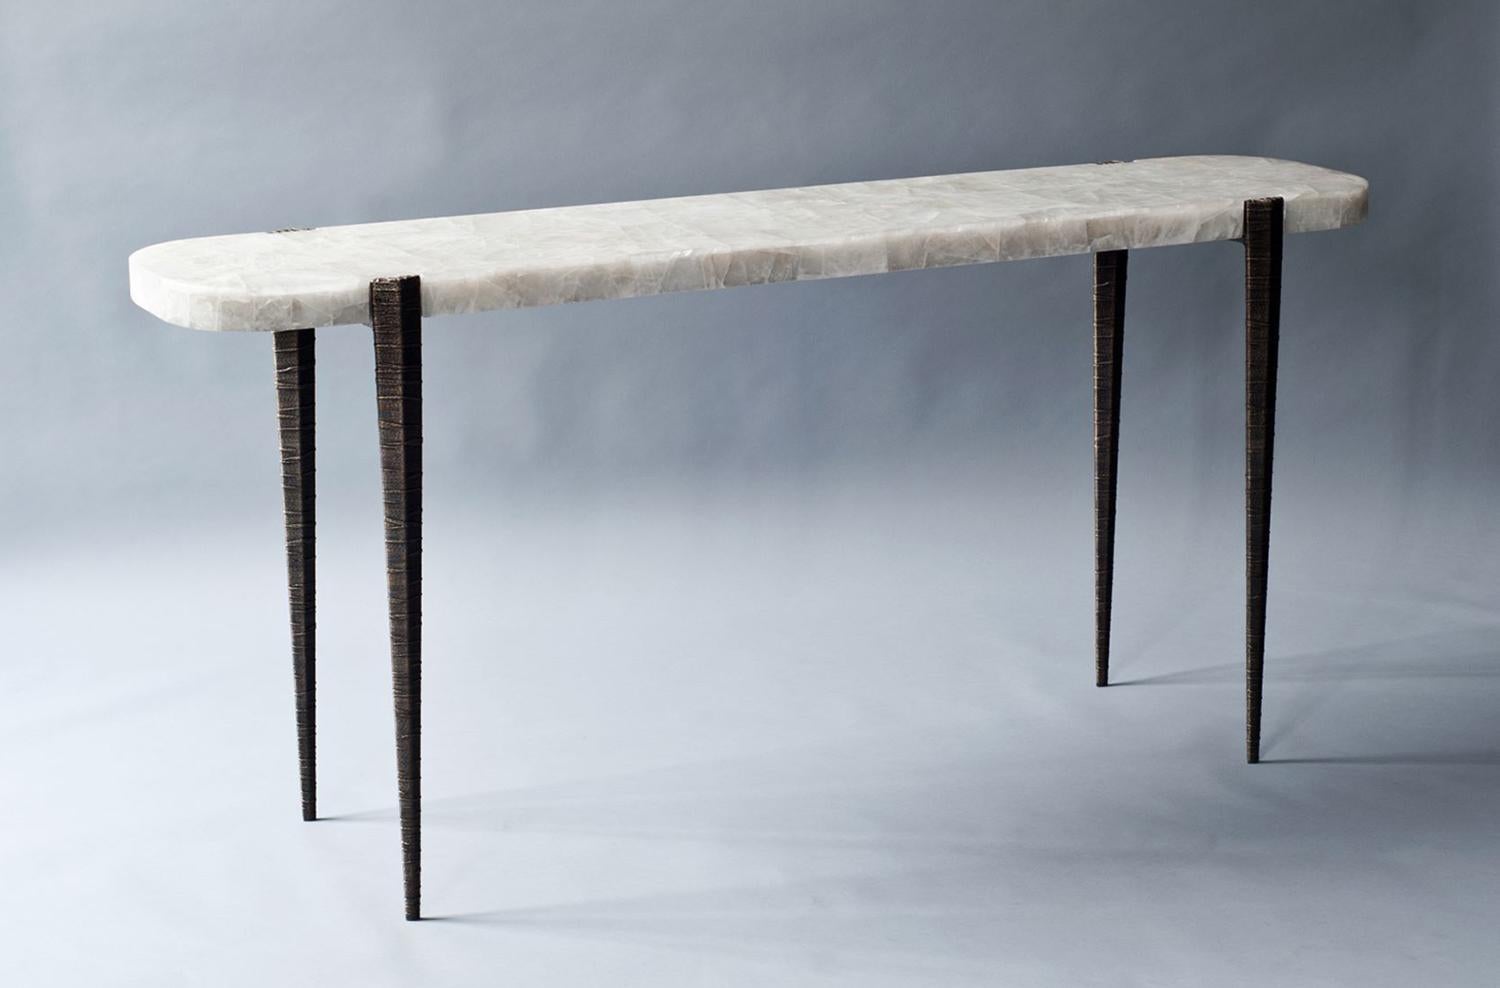 Bind console by DeMuro Das
Dimensions: W 165 x D 37.6 x H 76 cm
Materials: Quartz (white) -polished (Random) tabletop
Solid bronze (Antique) legs

Dimensions and finishes can be customized.

DeMuro Das is an international design firm and the